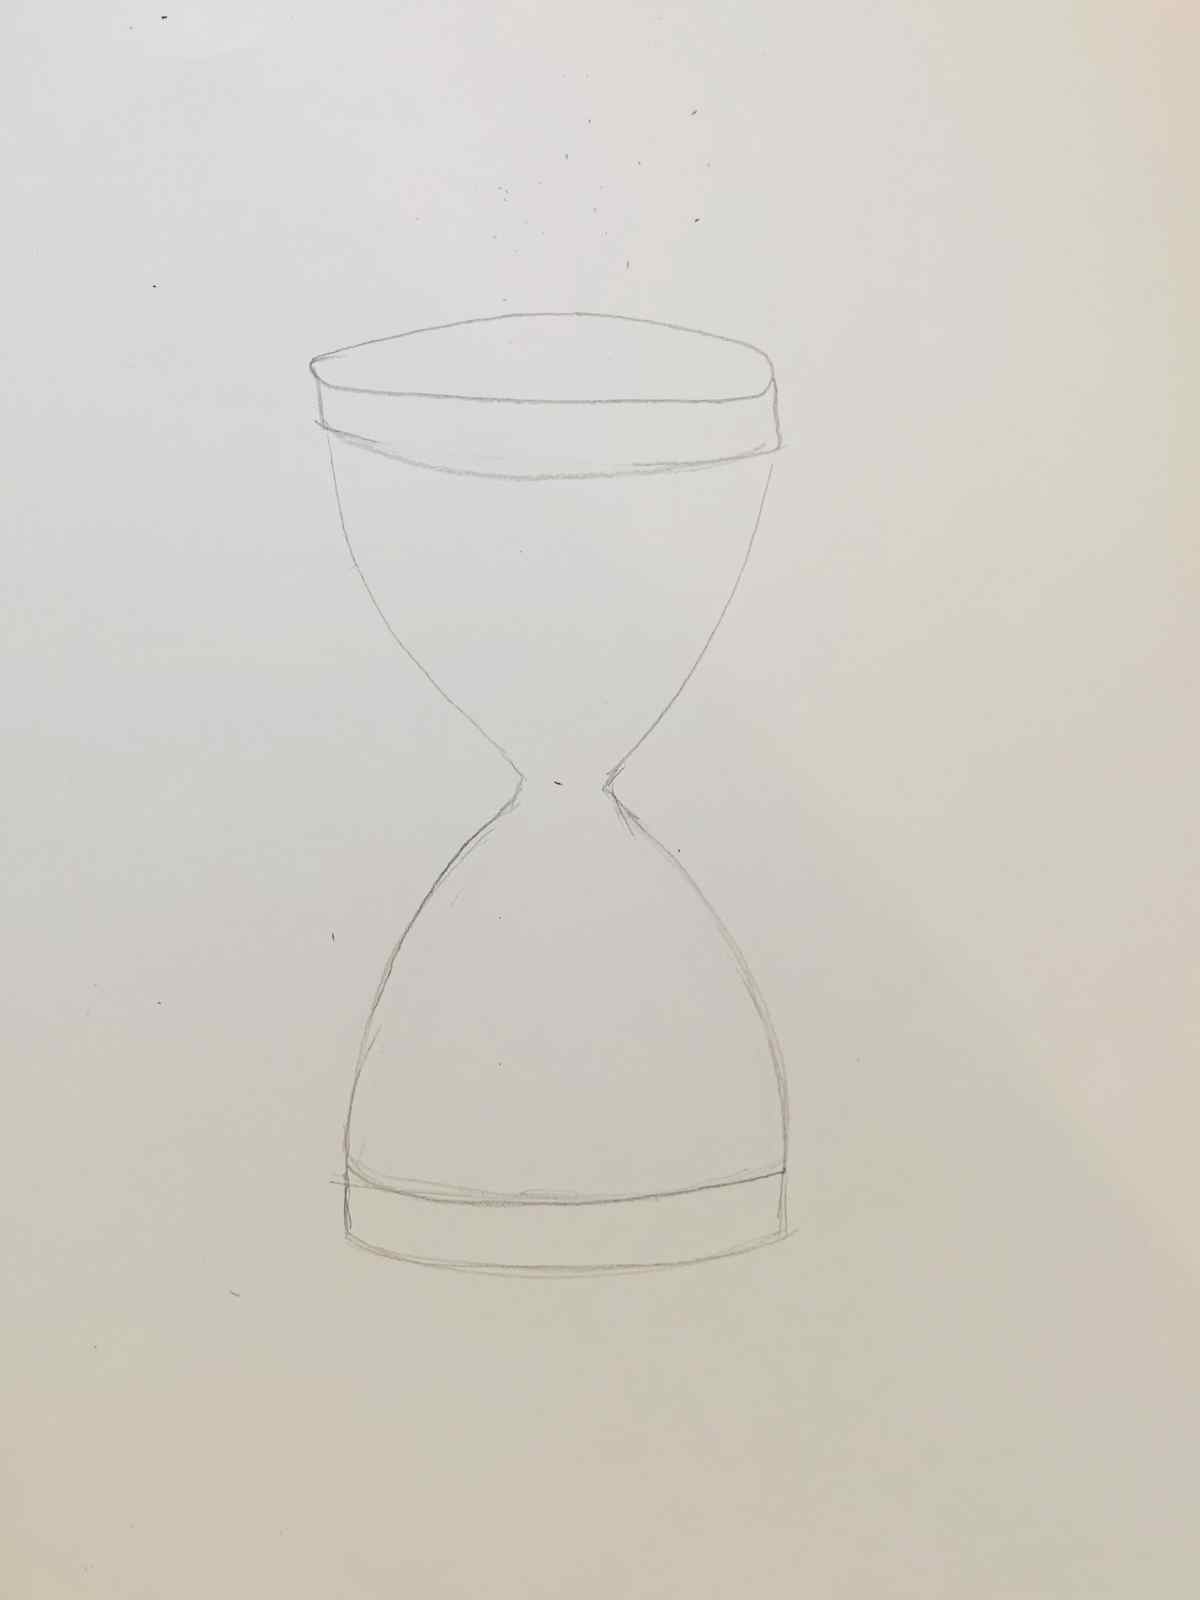 Outline of an hourglass